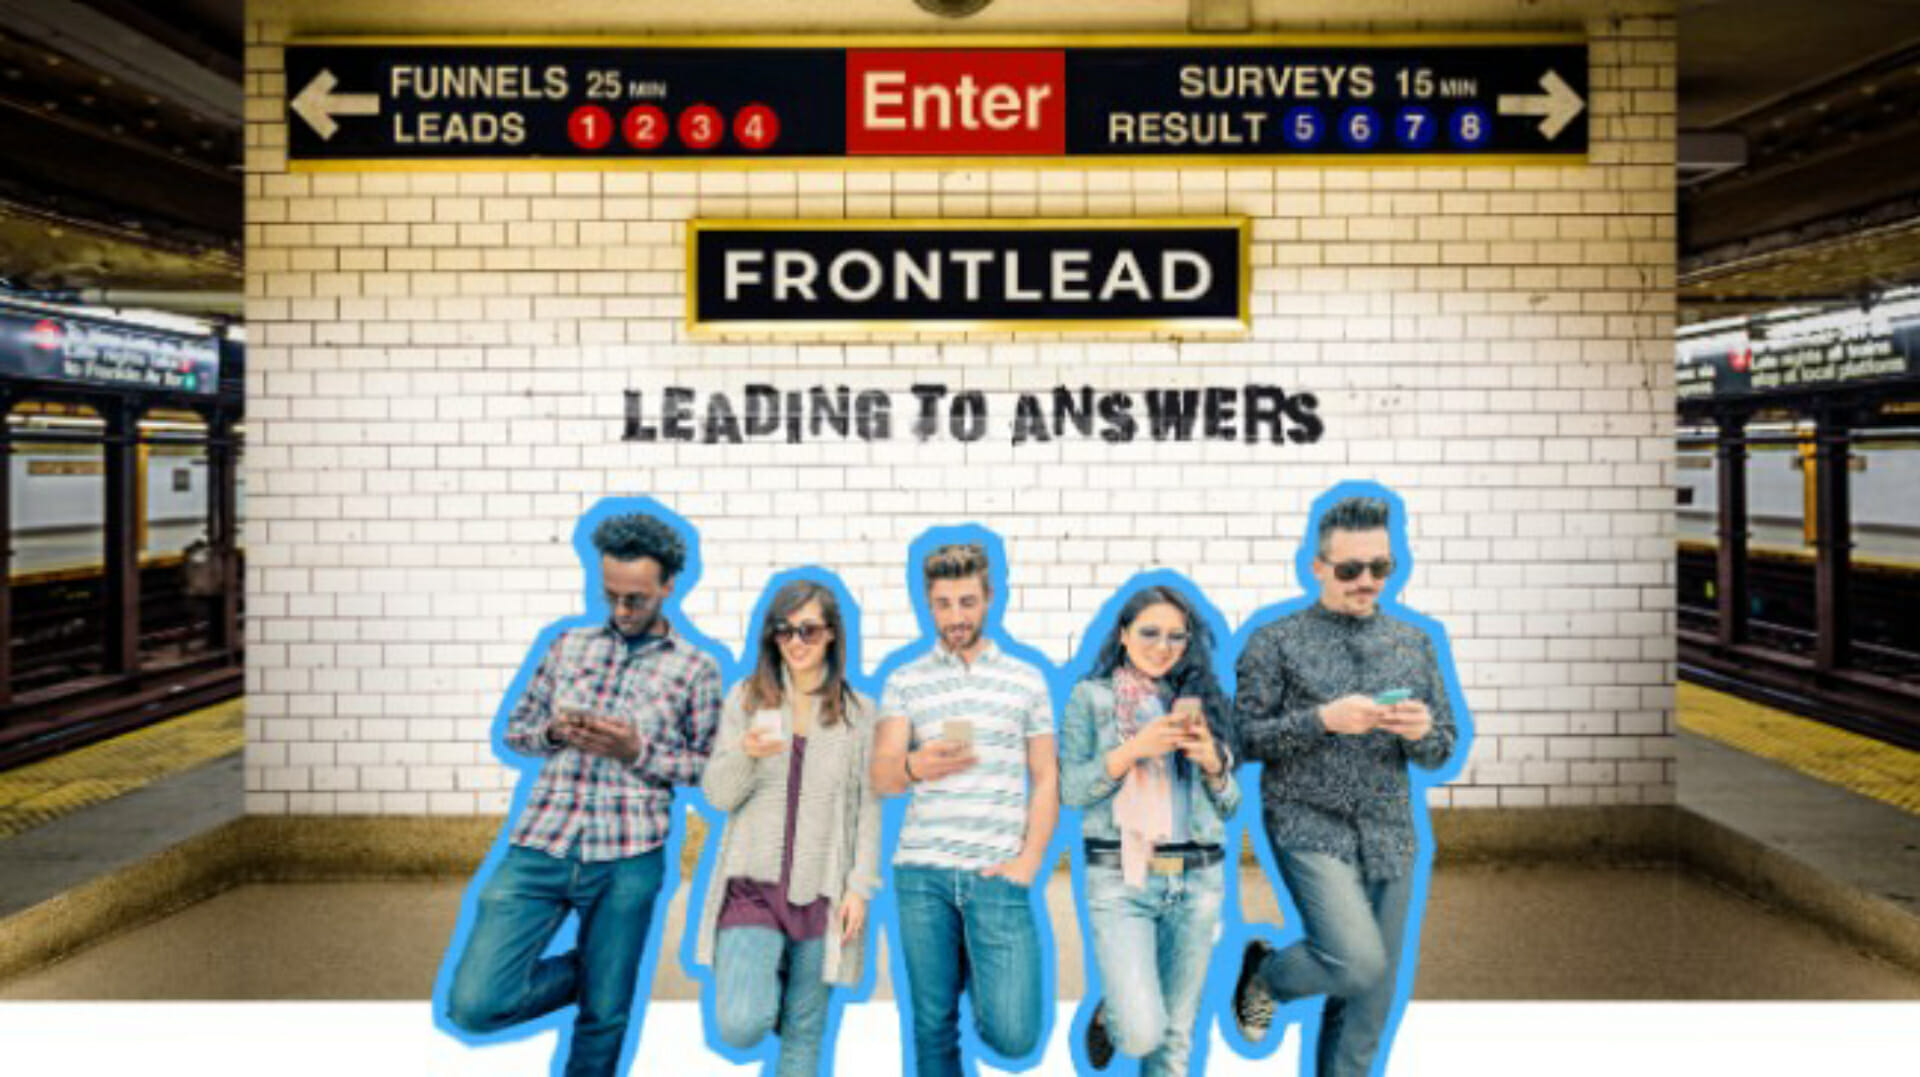 Lifetime Deal to FRONTLEAD – Automated Online Software: Plan40 for $29